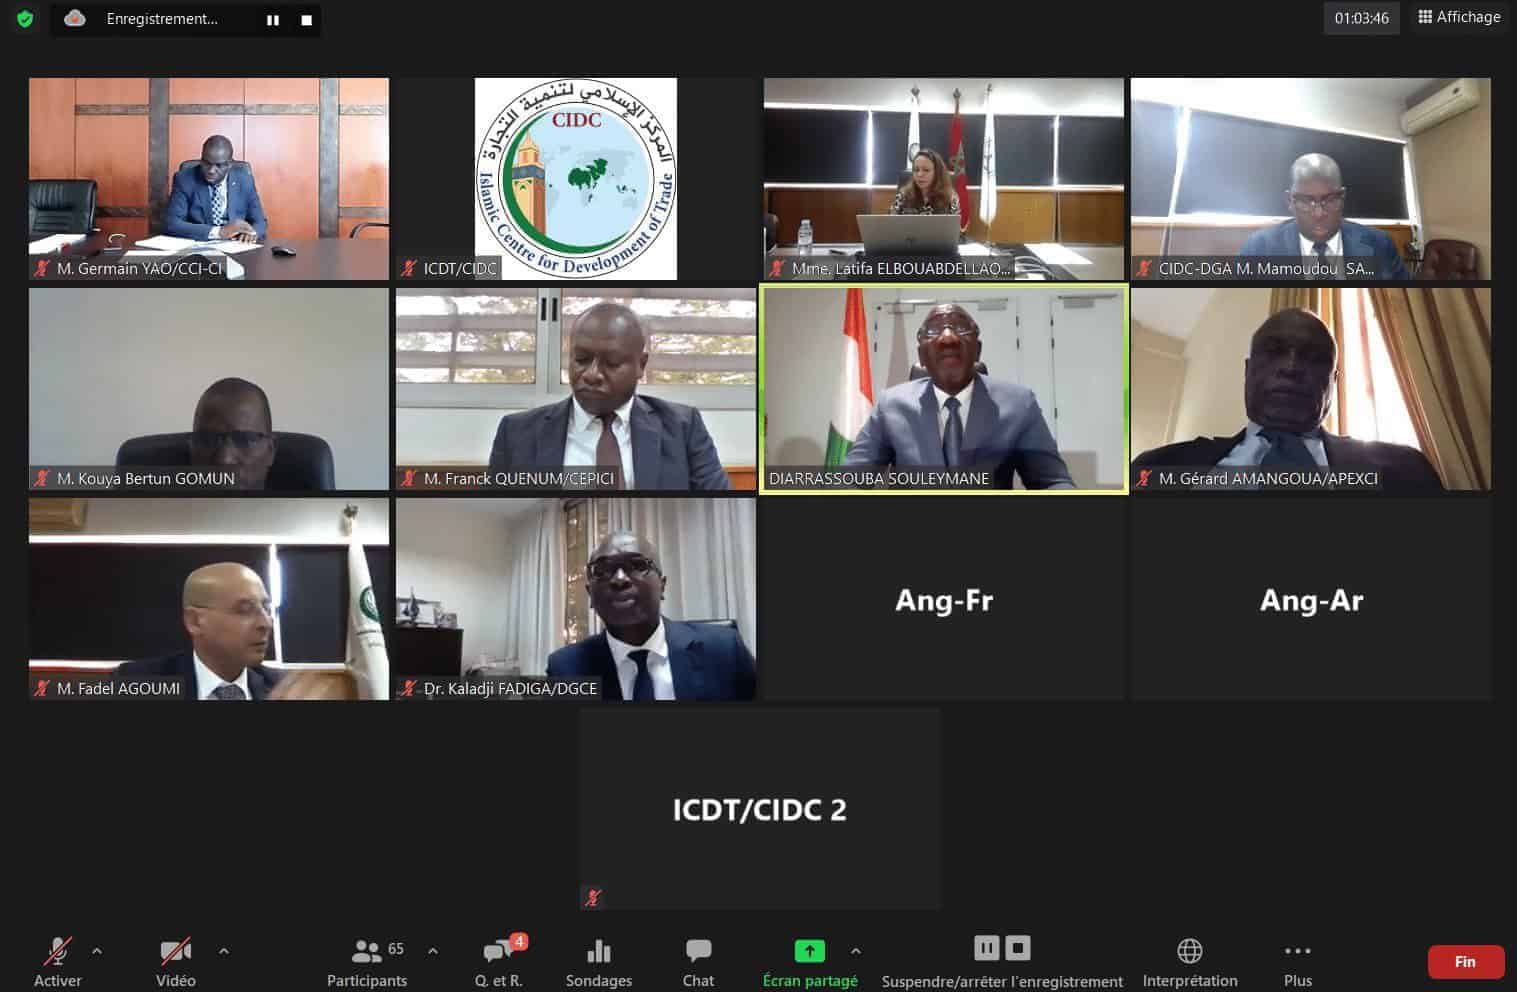 Webinar on “Doing Business in Cote d’Ivoire”